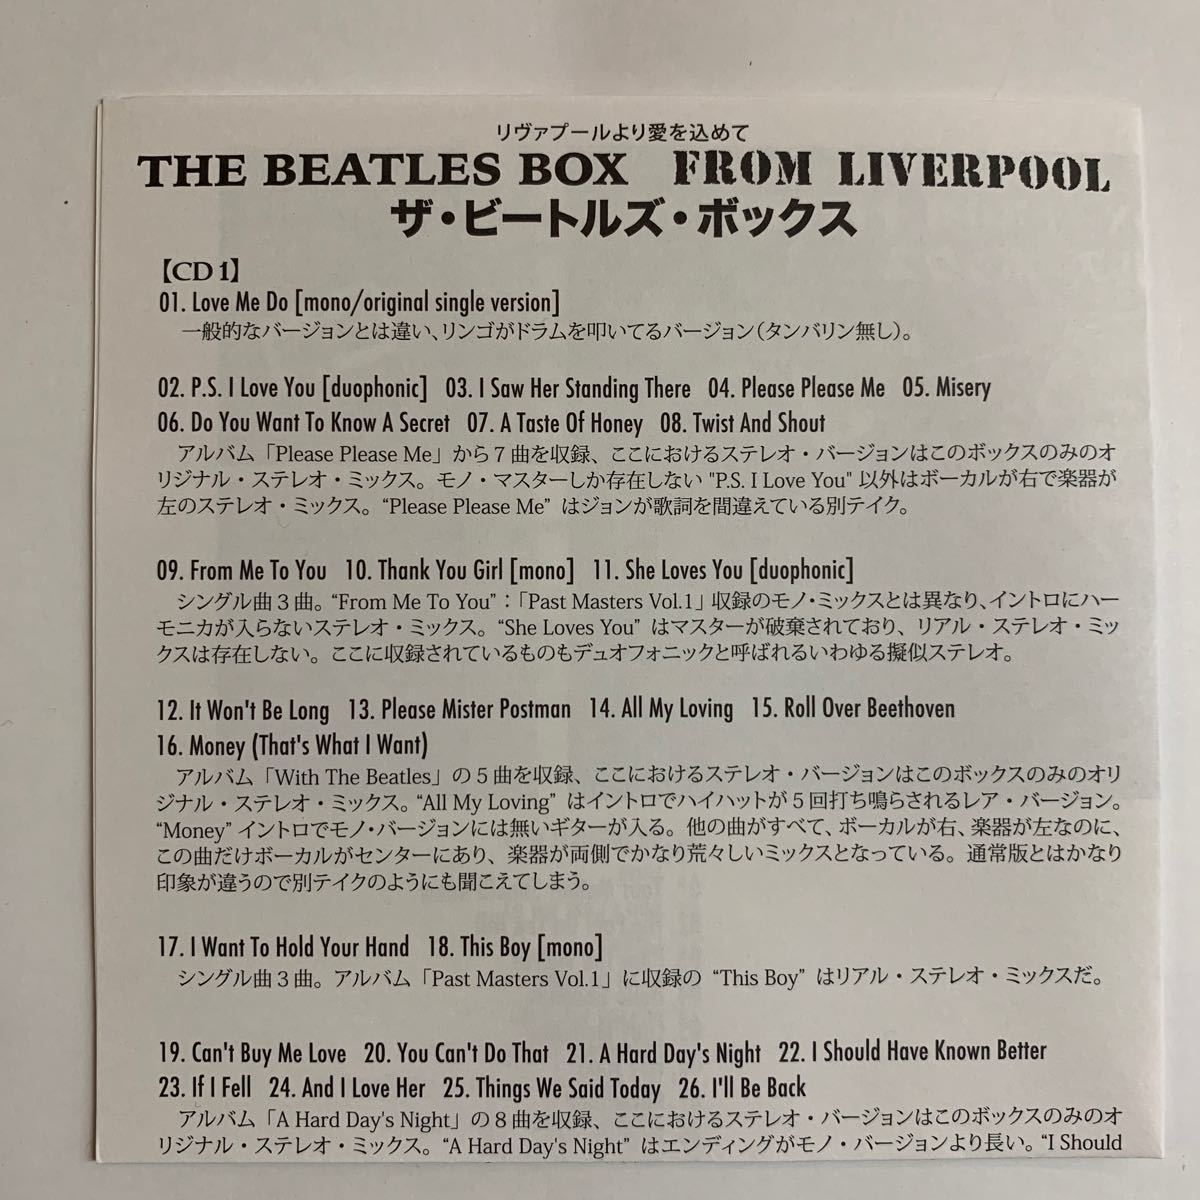 THE BEATLES / BOX FROM LIVERPOOL 5CD Empress Valley Supreme Disk 曲目シート付き。の画像3